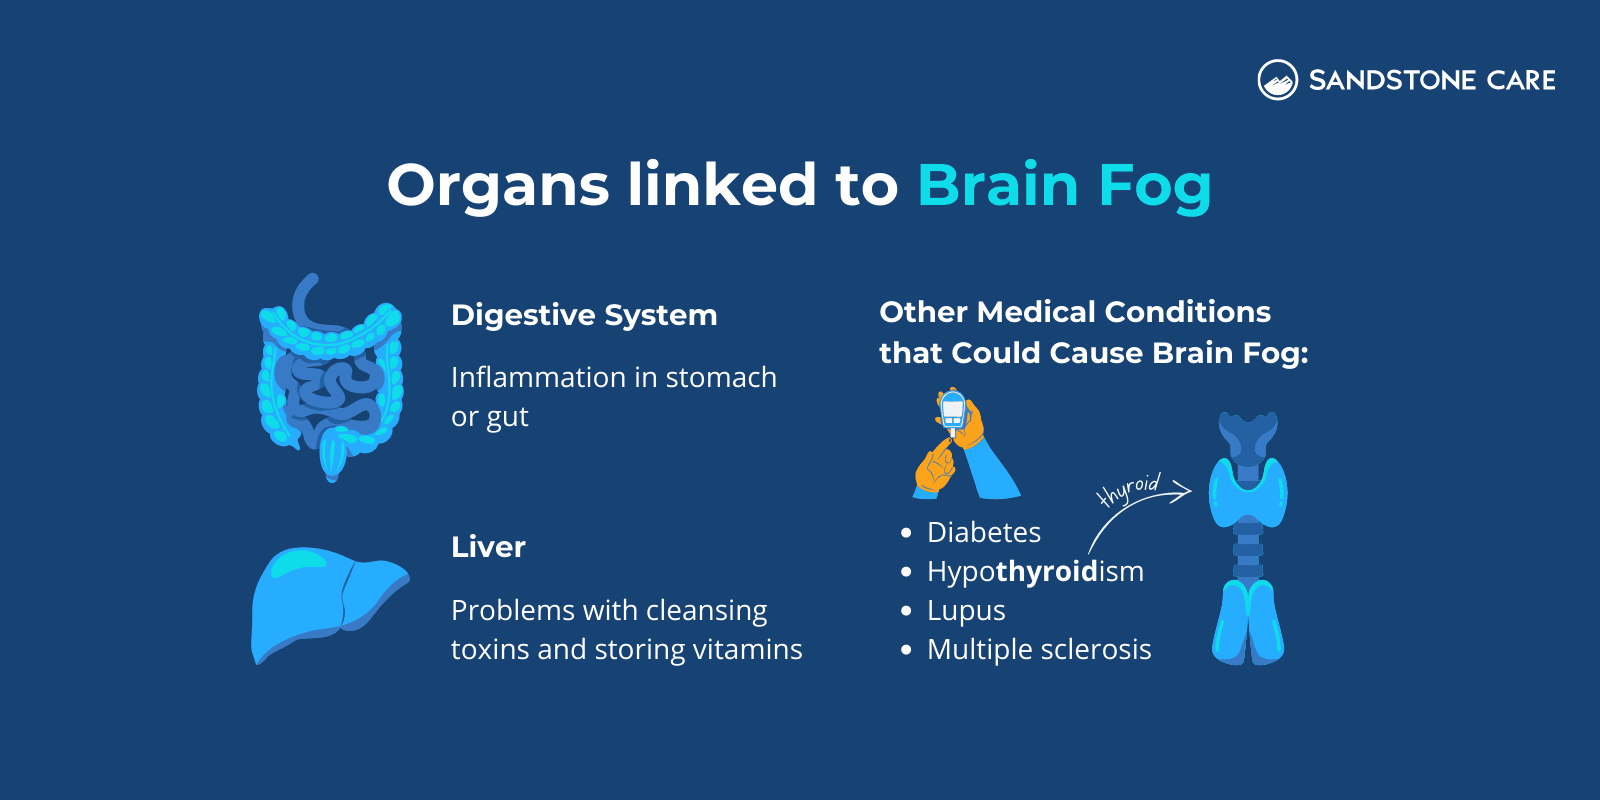 Brain Fog: What Is It? Symptoms, Causes, And Treatments